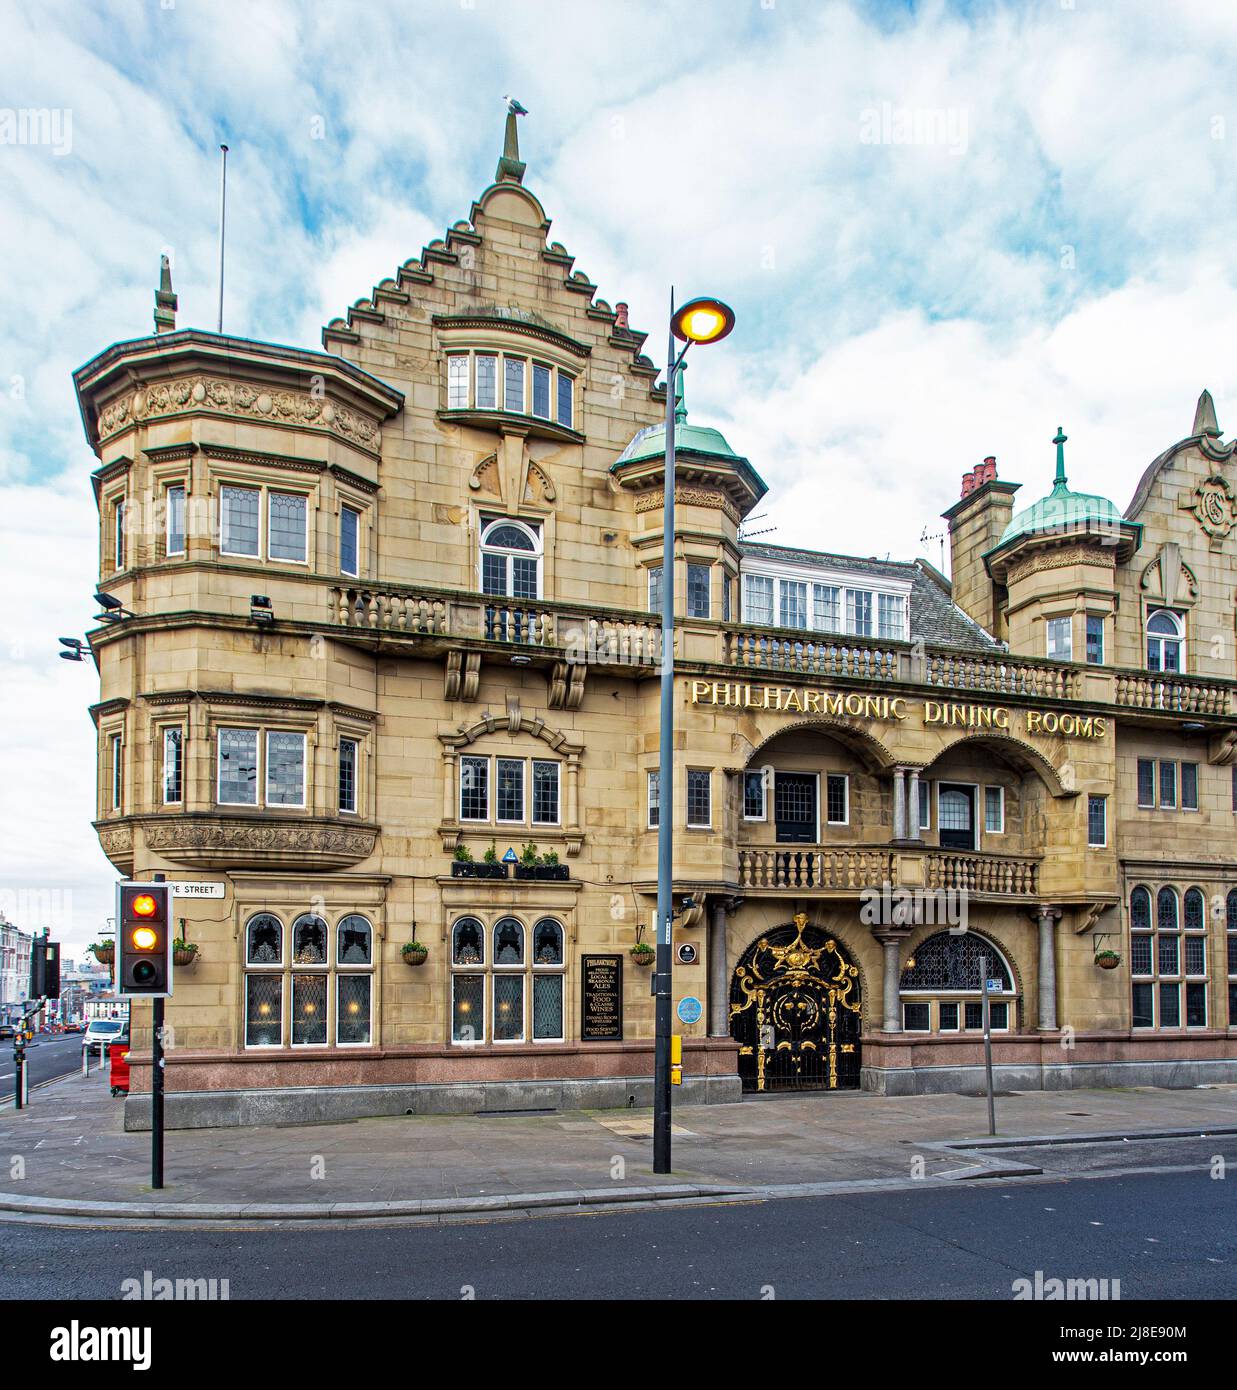 Exterior of The Philharmonic Dining Rooms in Liverpool city centre, United Kingdom Stock Photo